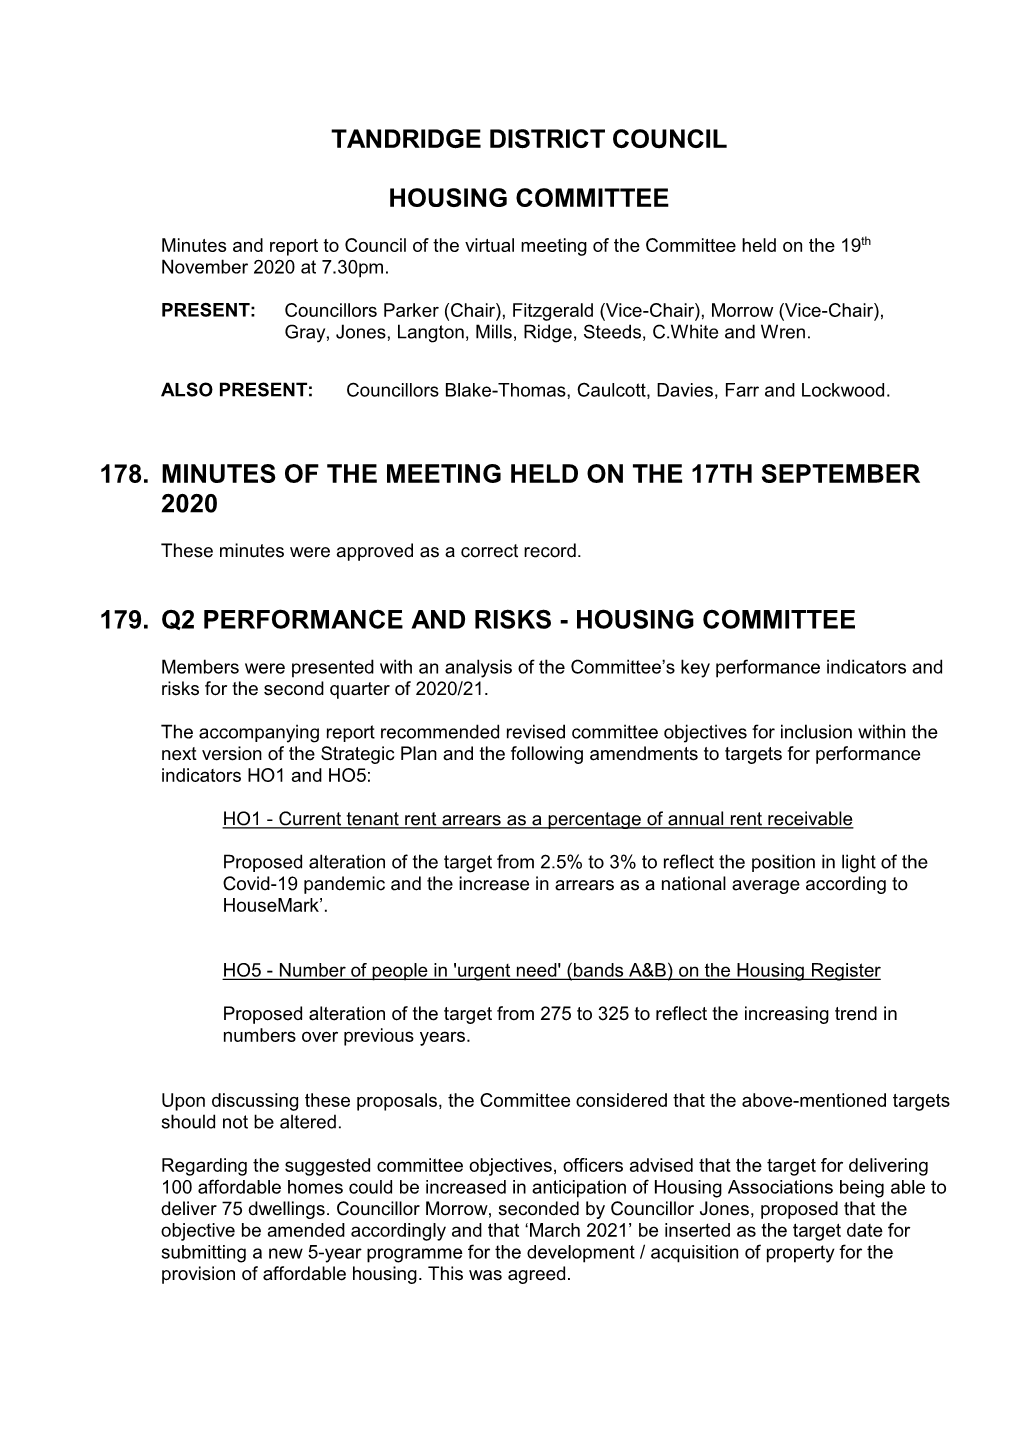 Tandridge District Council Housing Committee